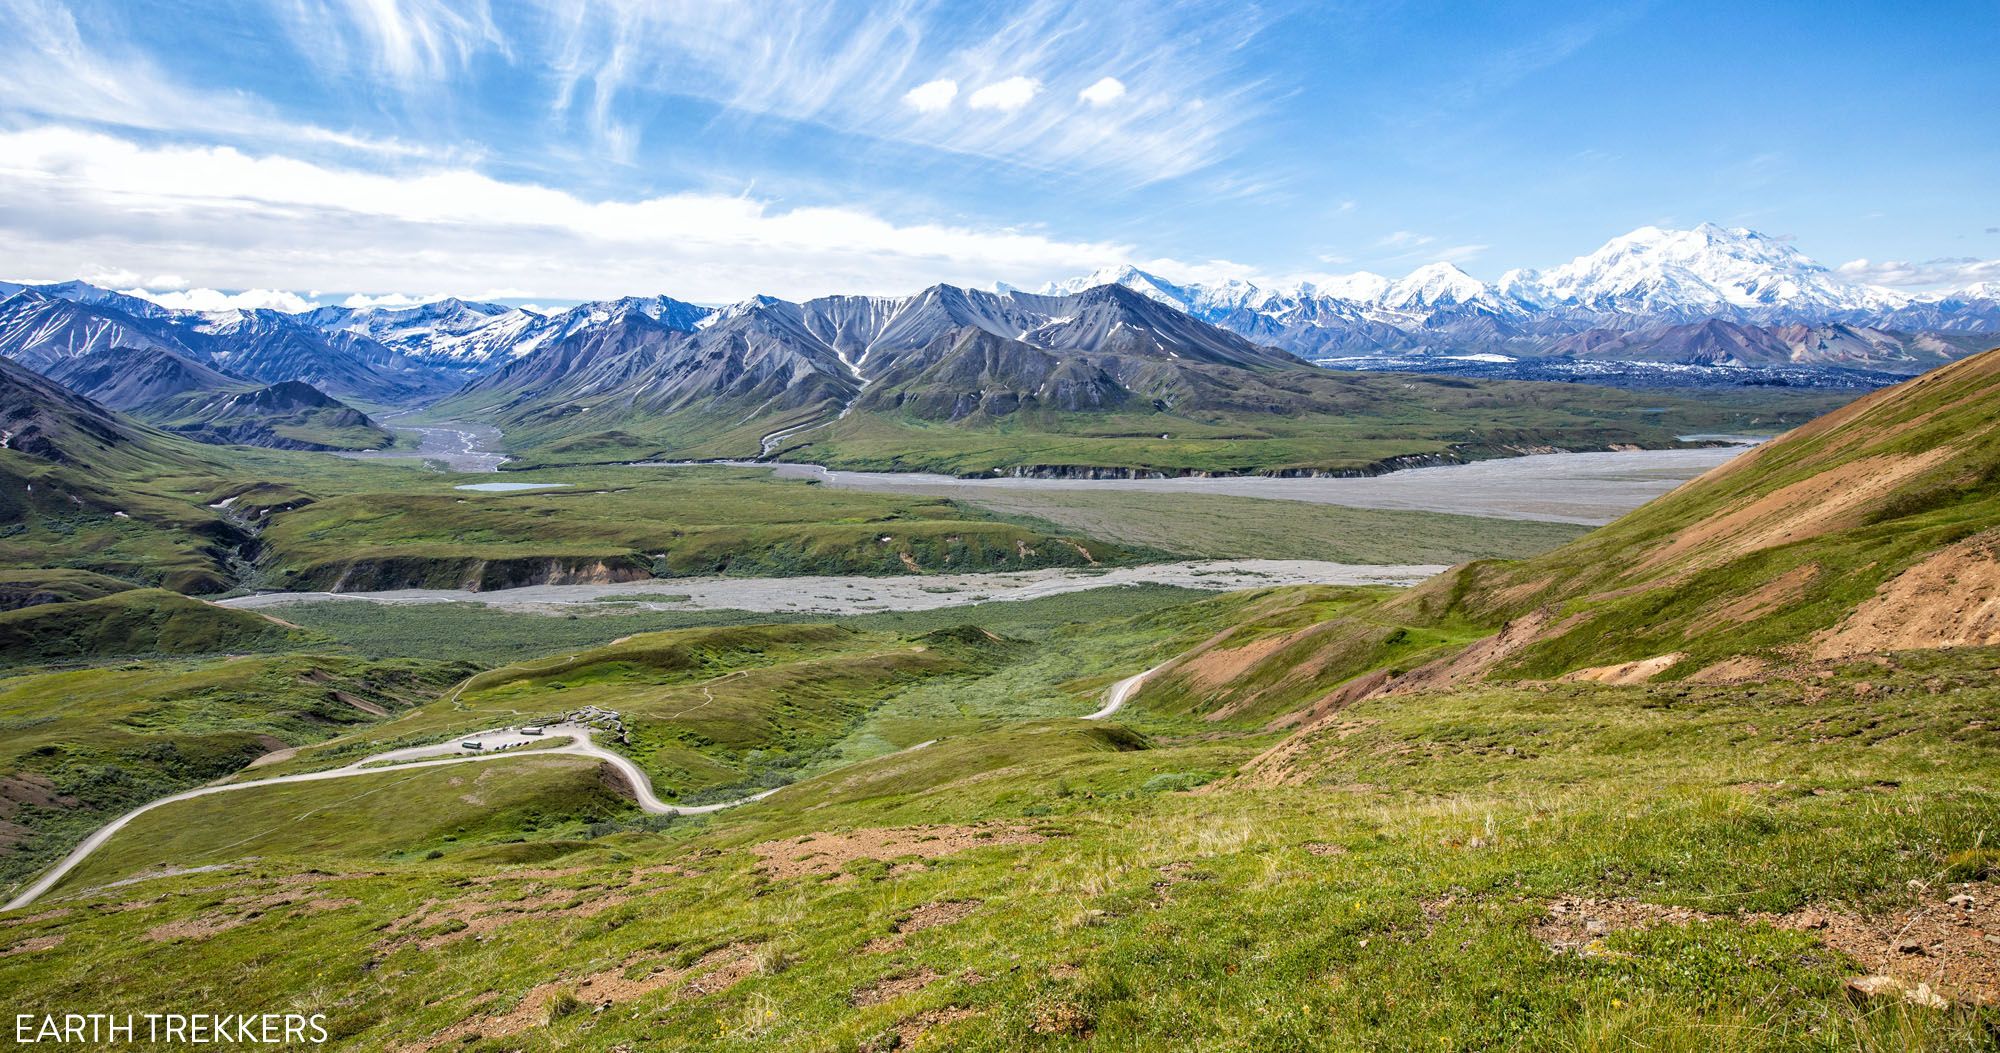 How to Visit Eielson Denali